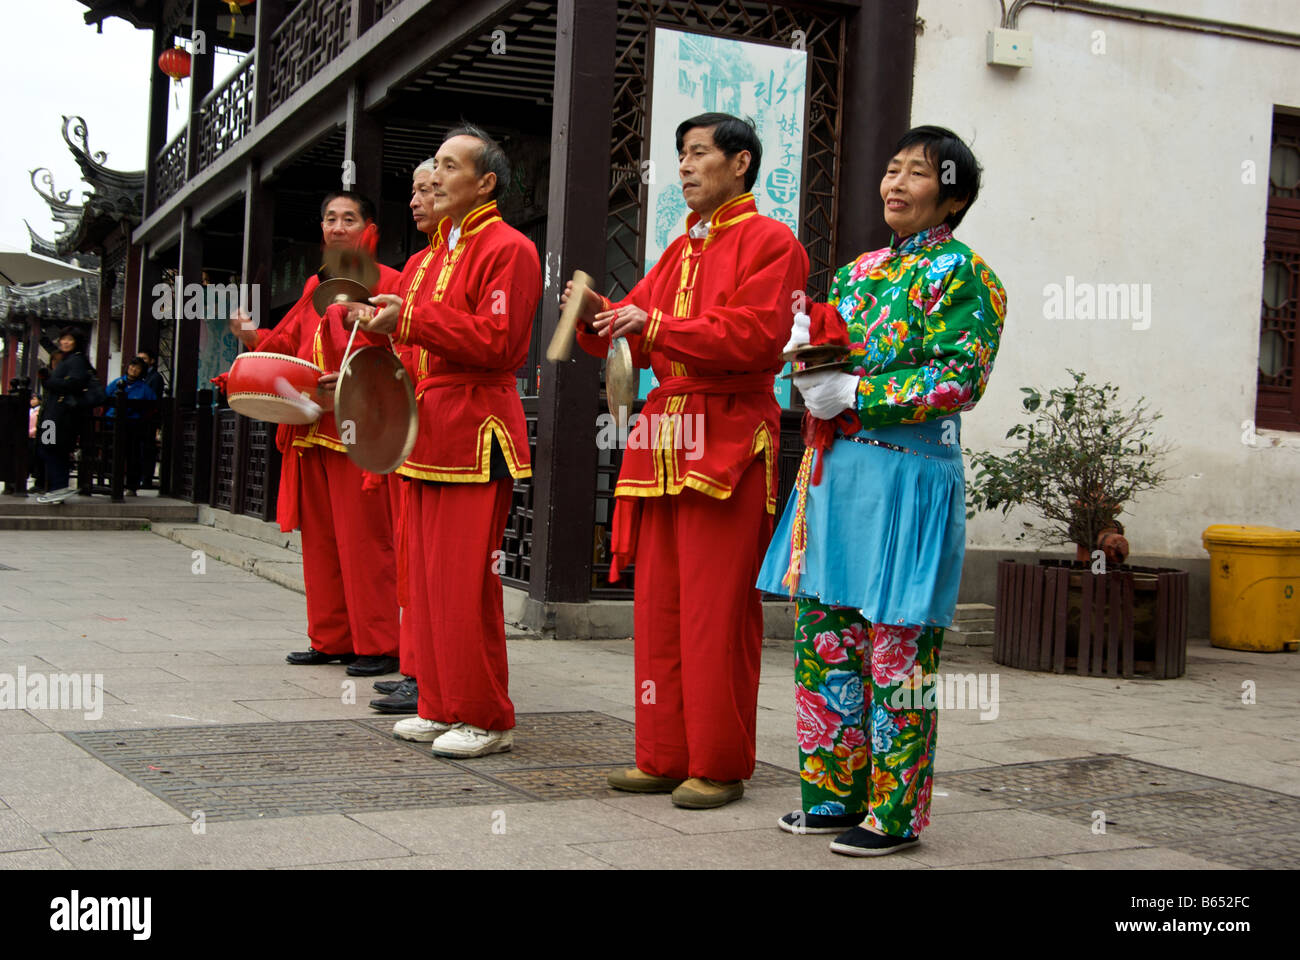 Chinese Musicians In Motion Blur Wearing Traditional Garb Playing